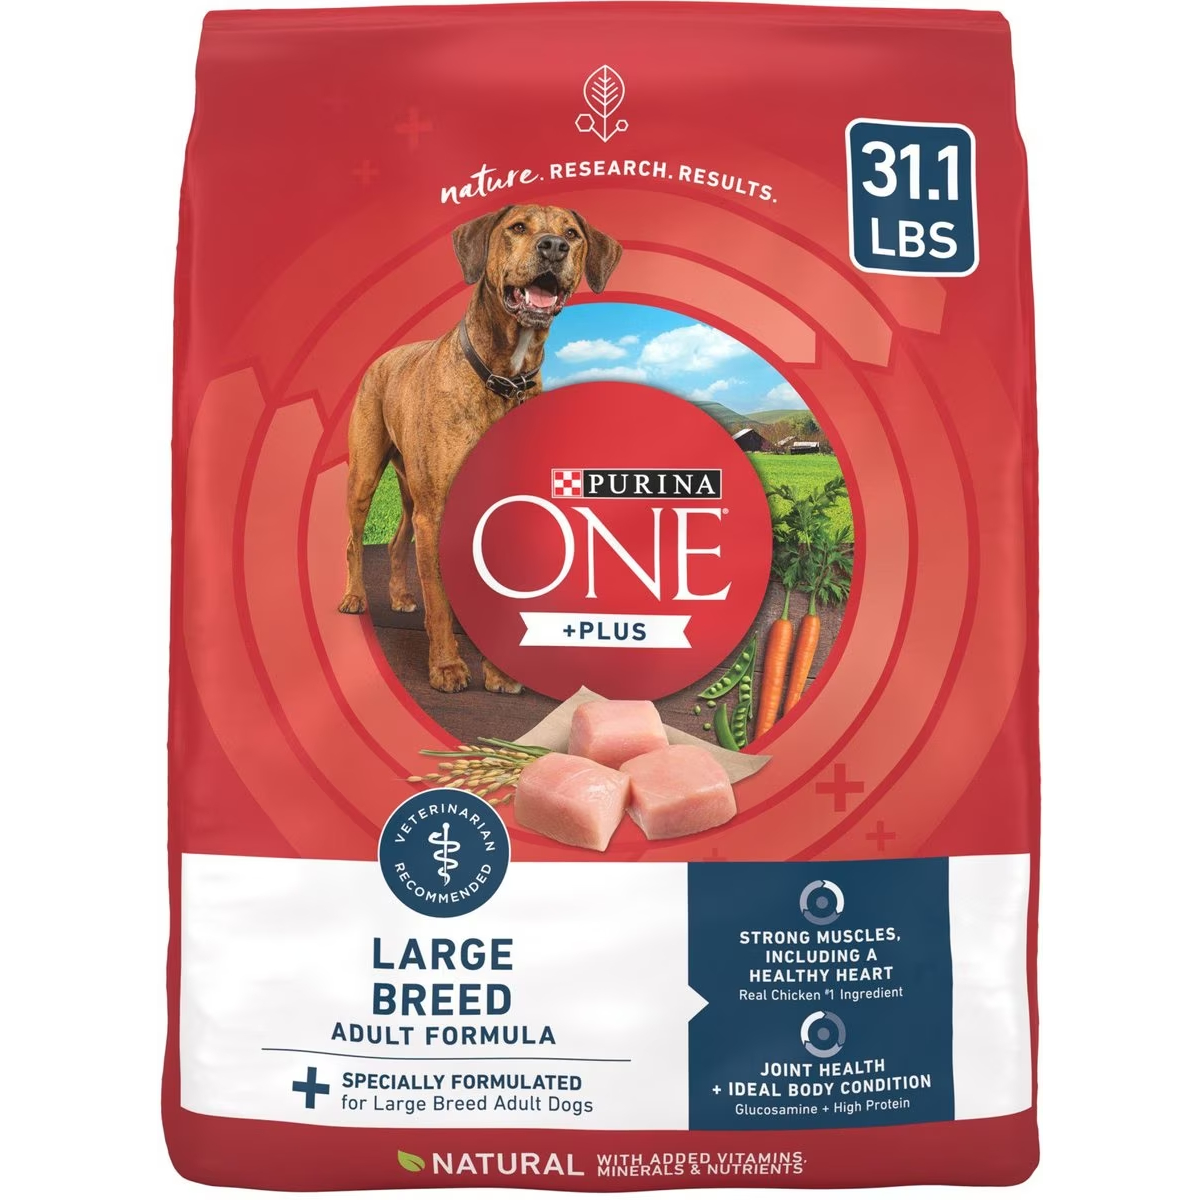 New Project Purina ONE Natural Large Breed +Plus Formula Dry Dog Food 